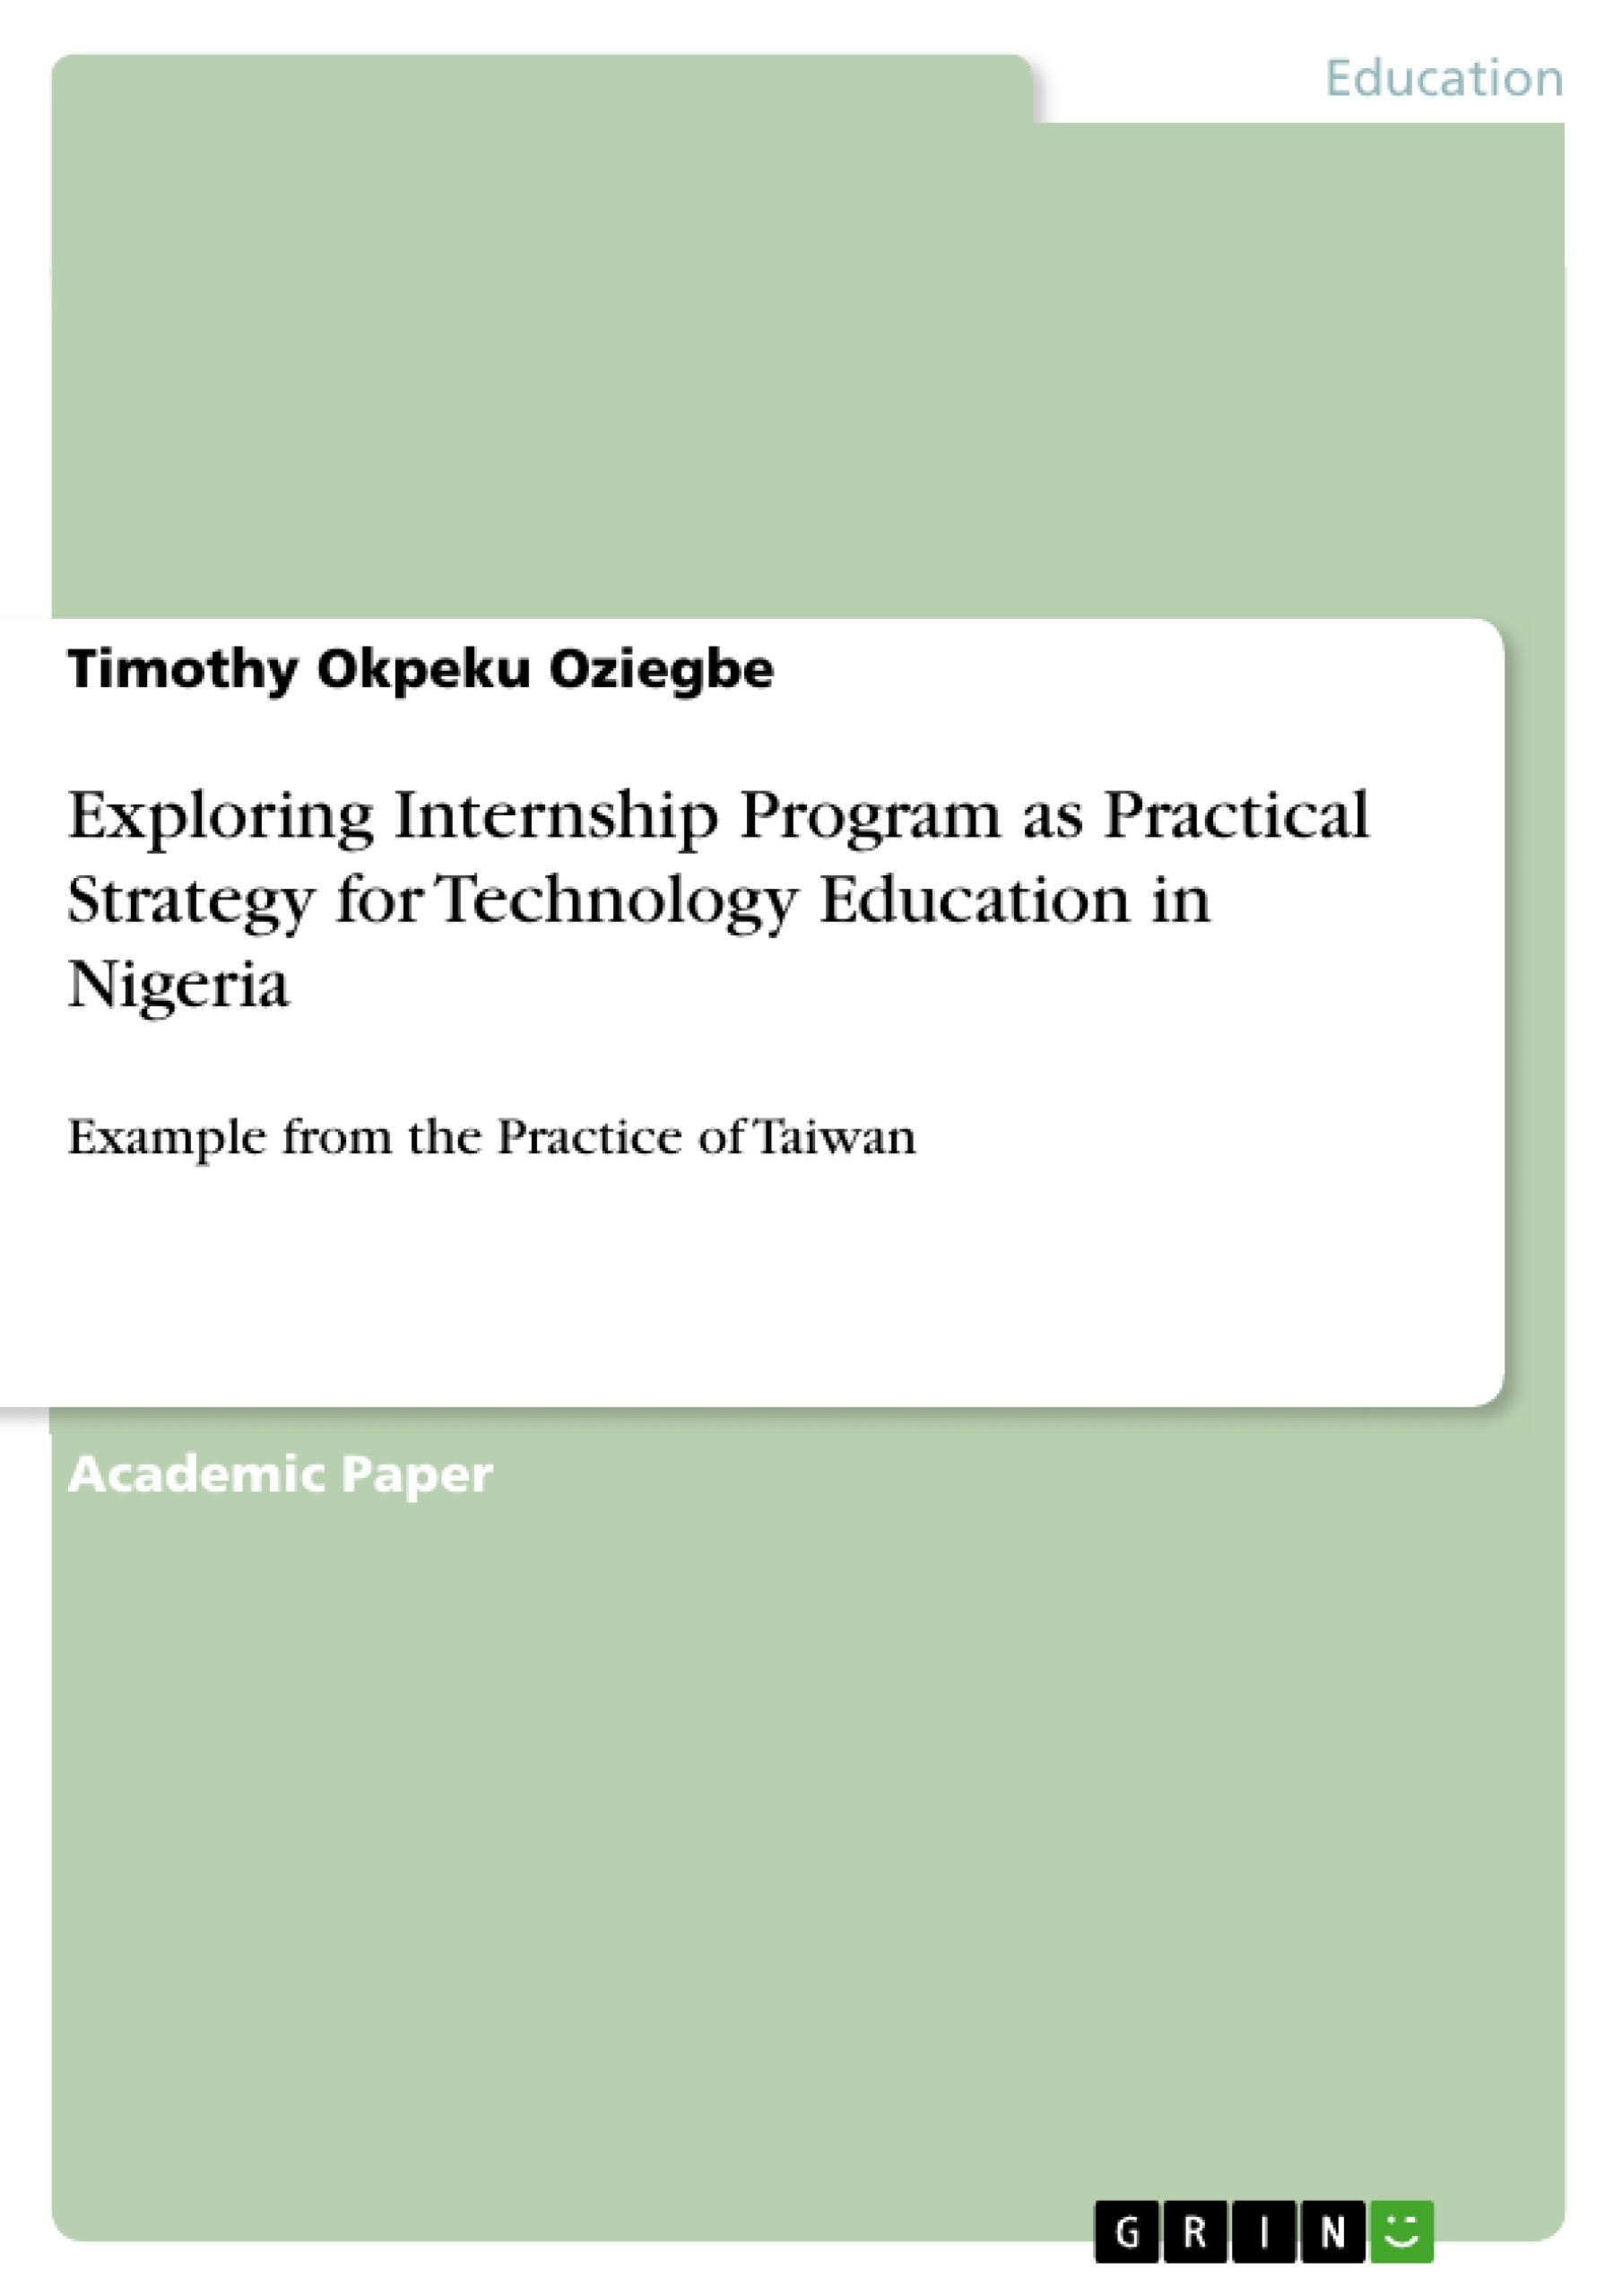 Title: Exploring Internship Program as Practical Strategy for Technology Education in Nigeria